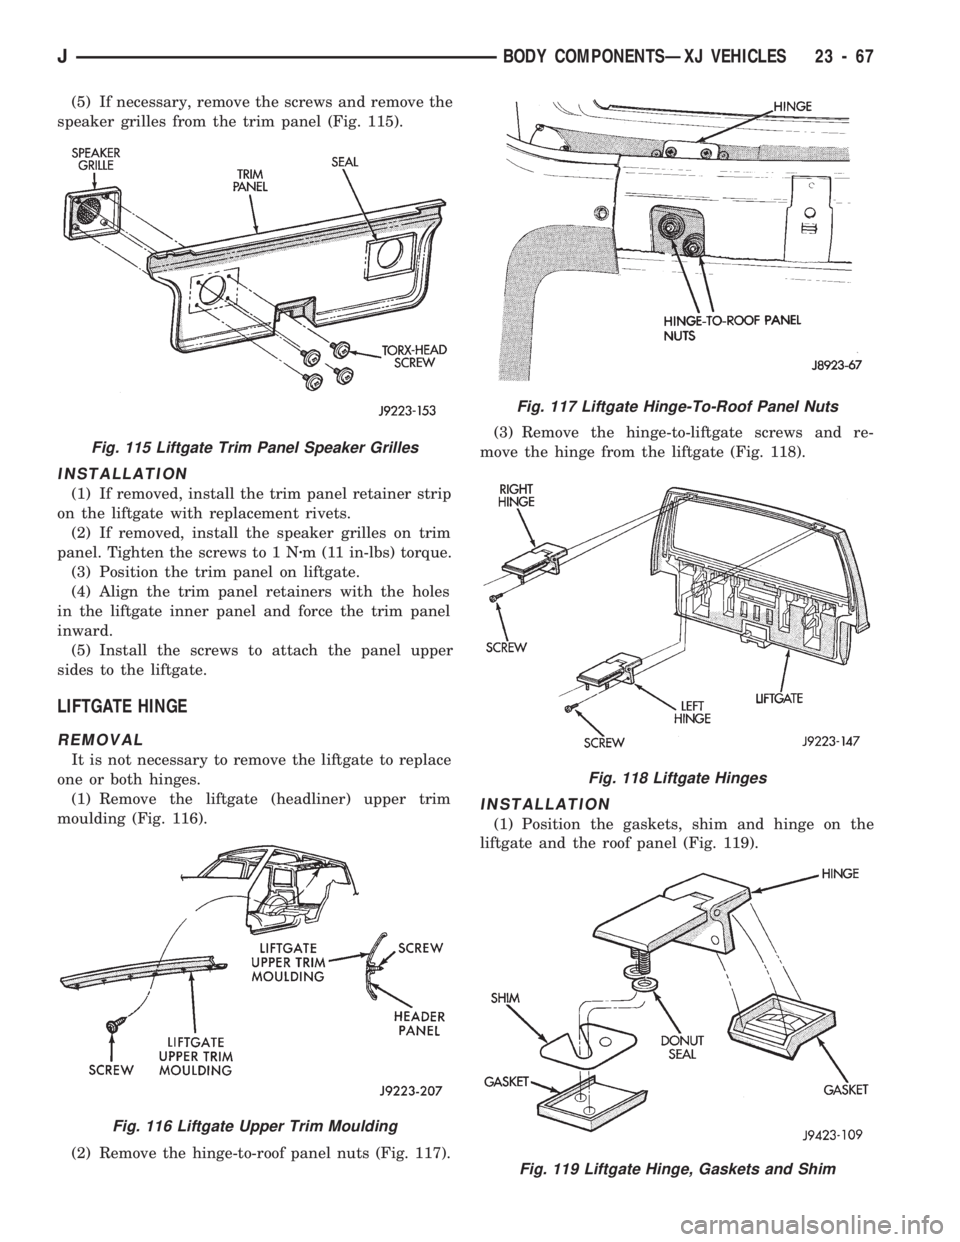 JEEP WRANGLER 1994  Owners Manual Fig. 116 Liftgate Upper Trim Moulding
Fig. 117 Liftgate Hinge-To-Roof Panel Nuts
Fig. 118 Liftgate Hinges
Fig. 119 Liftgate Hinge, Gaskets and Shim
JBODY COMPONENTSÐXJ VEHICLES 23 - 67 